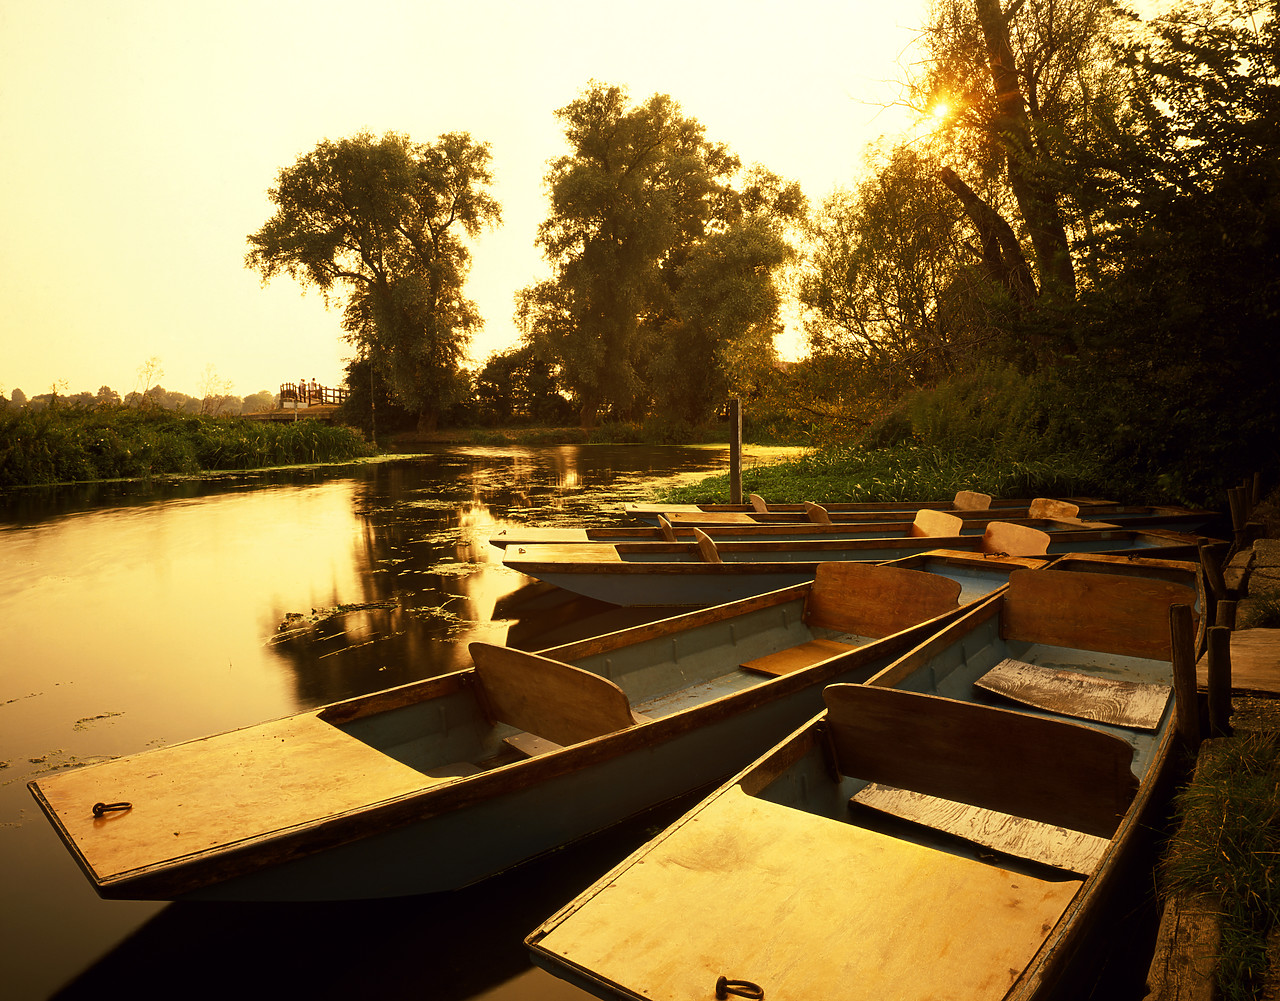 #892412-1 - Punts on River Ouse, Houghton, Cambridgeshire, England